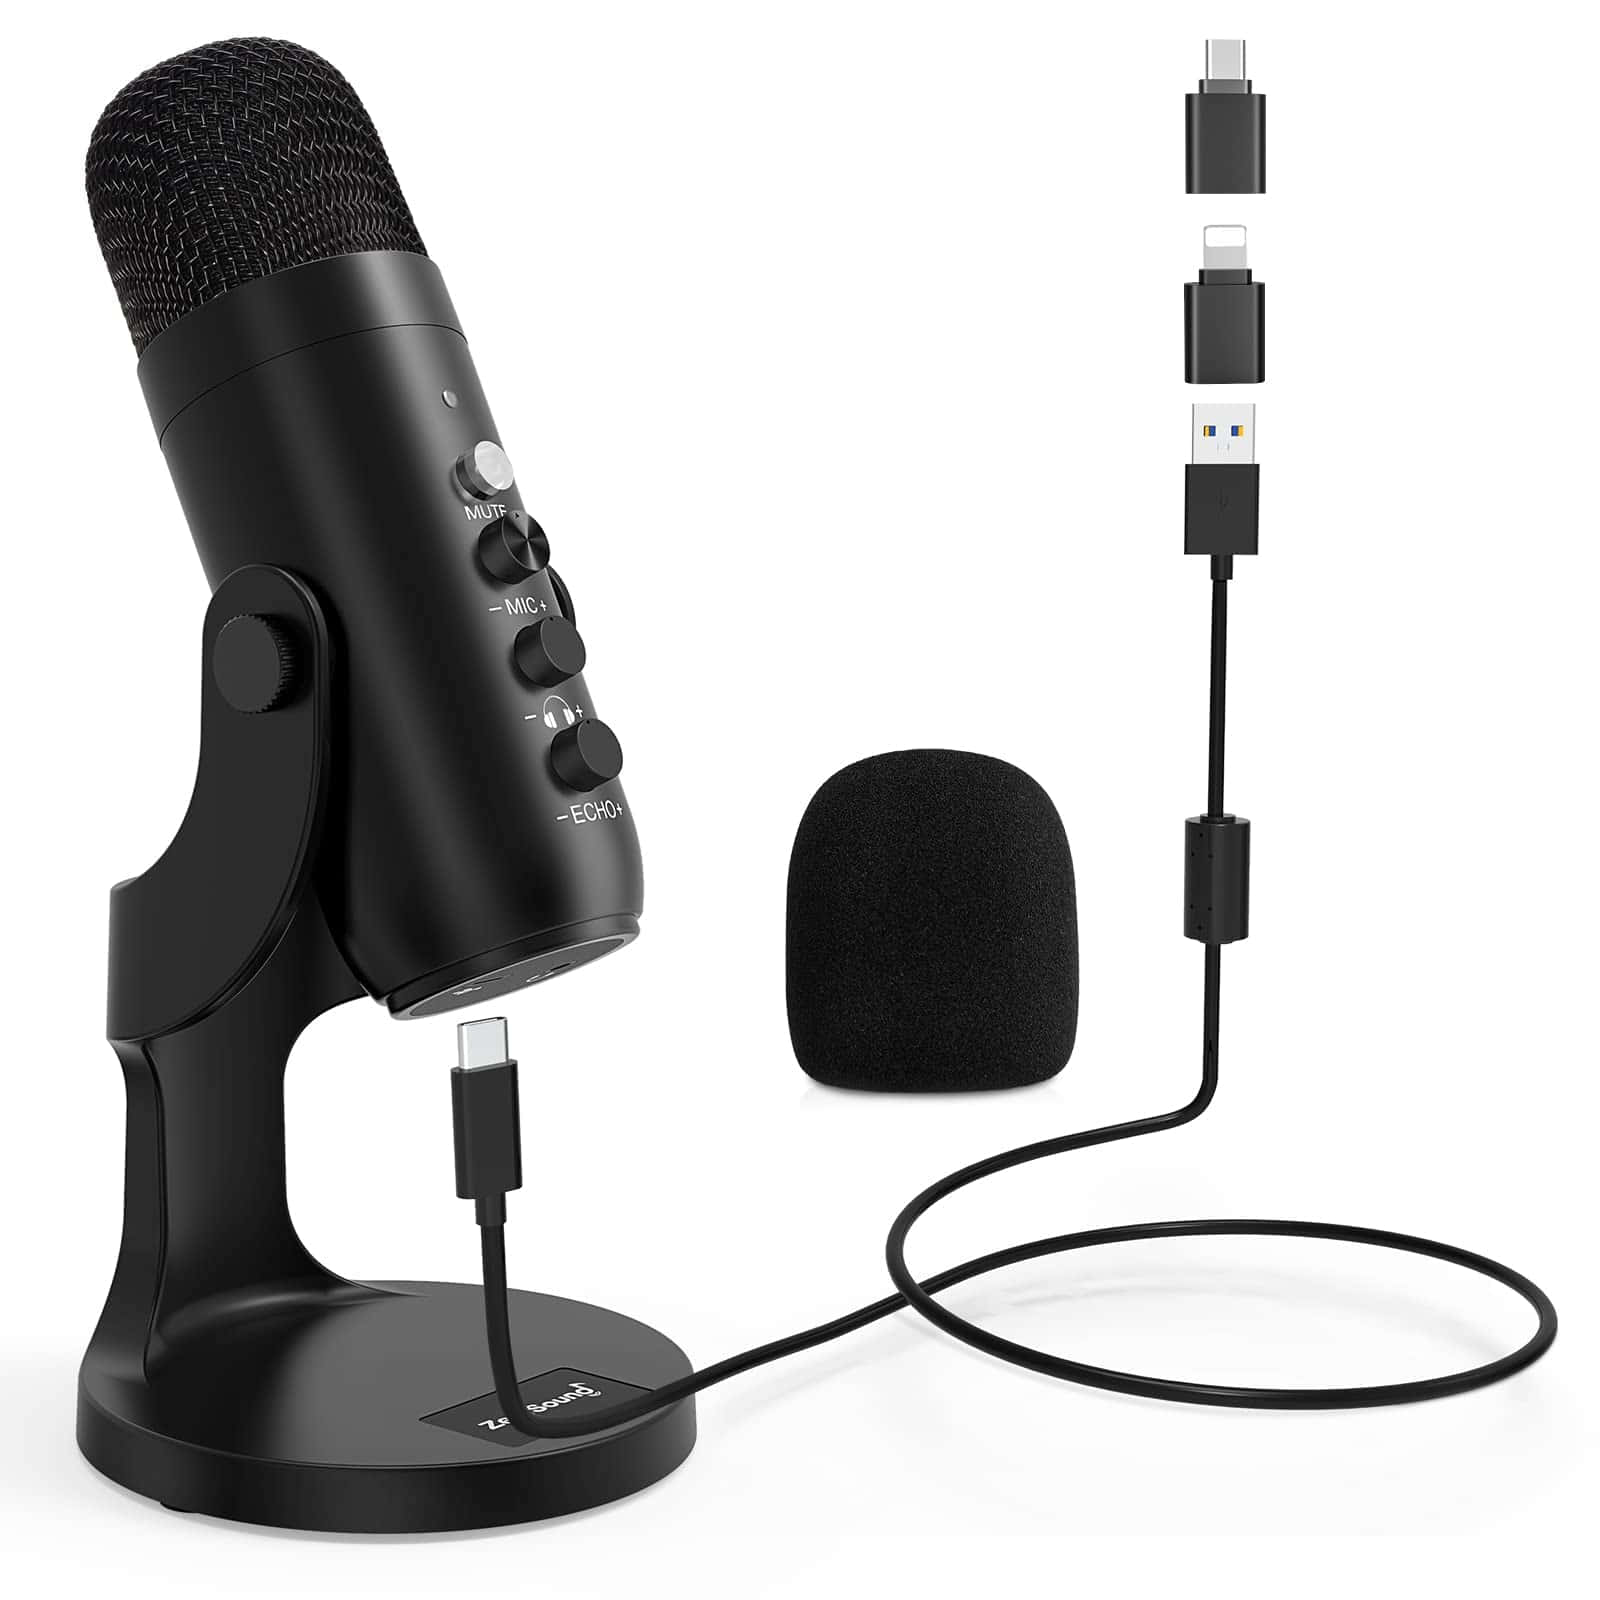 A Microphone With A Usb Cable And A Microphone Stand